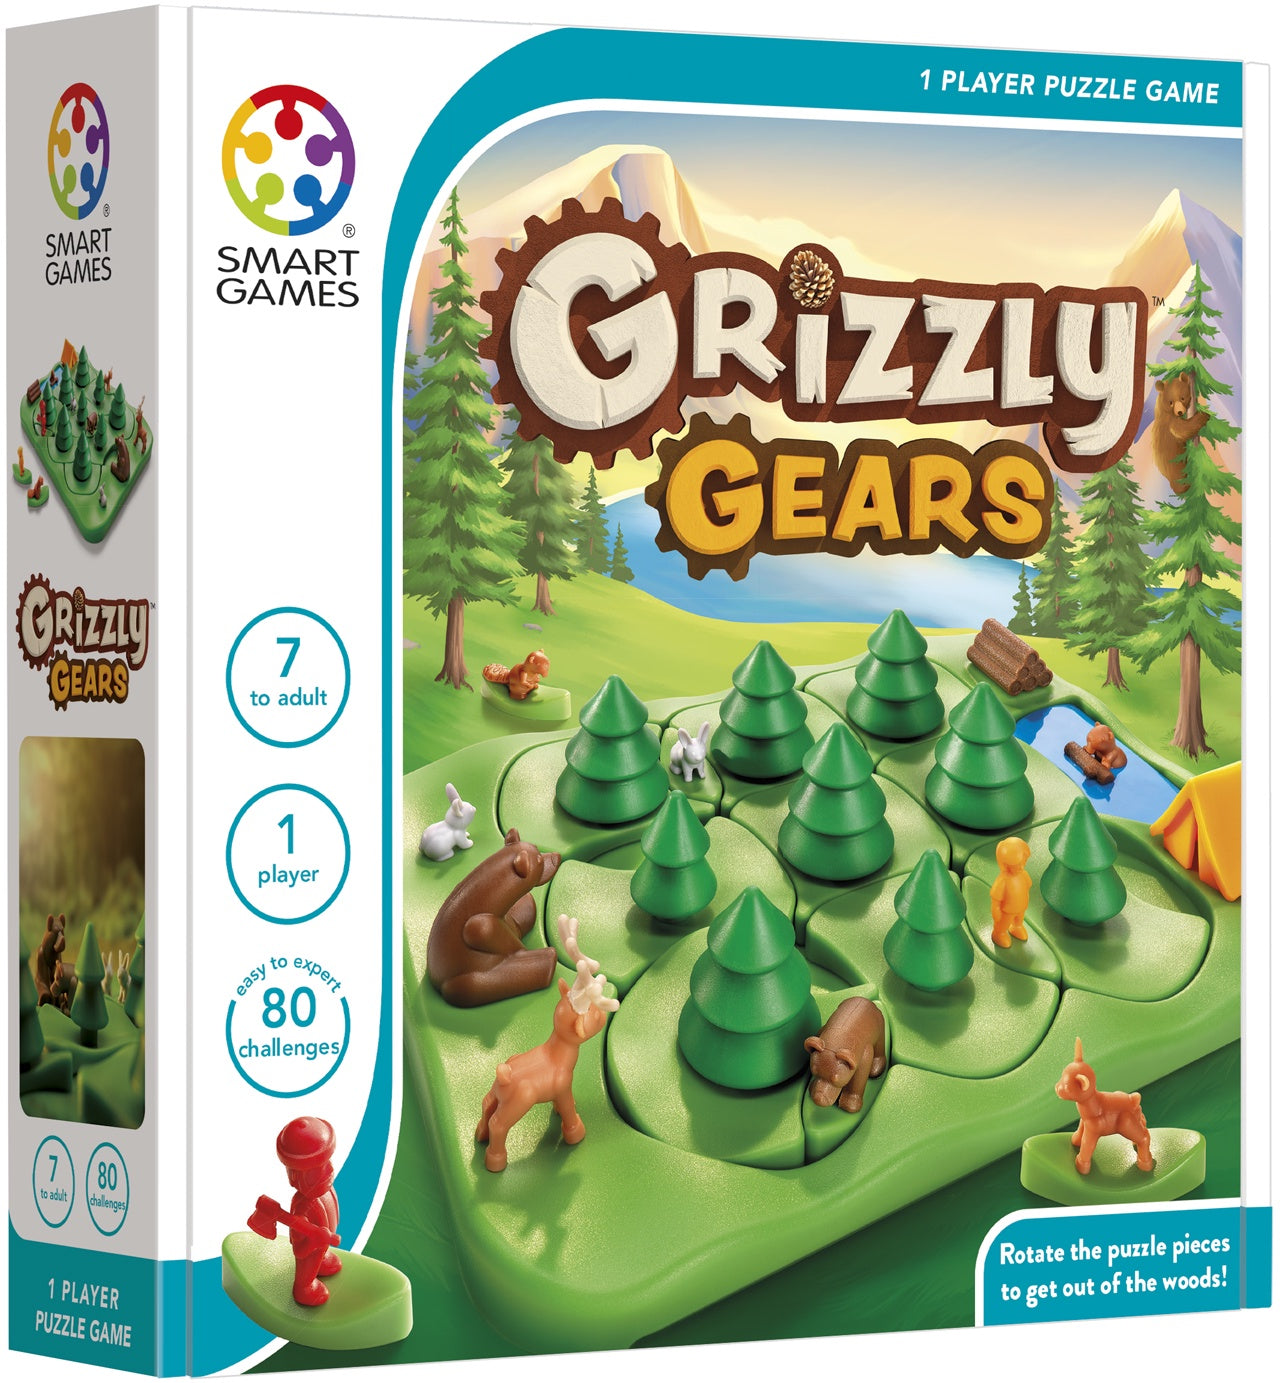 SMART GAMES - Grizzly Gears